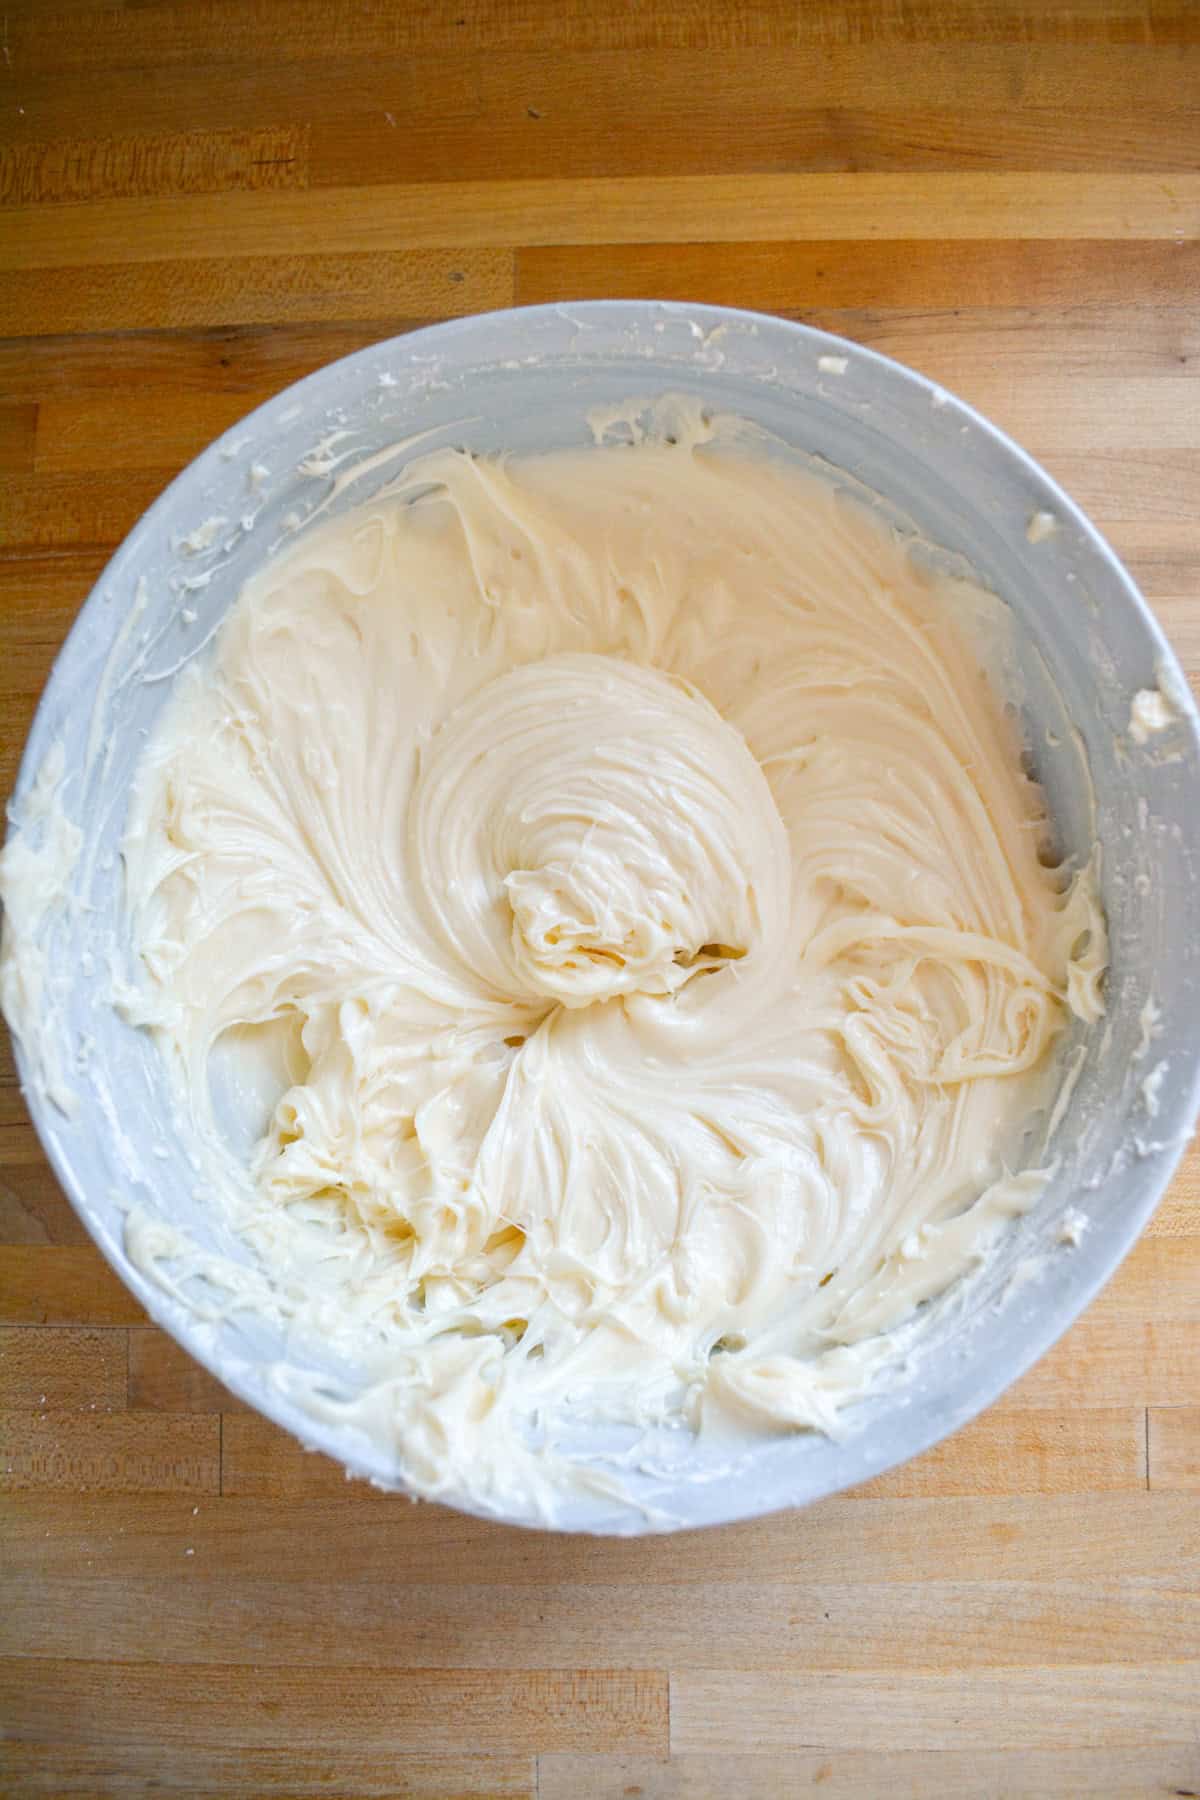 Vegan cream cheese frosting in a mixing bowl on a wooden surface.